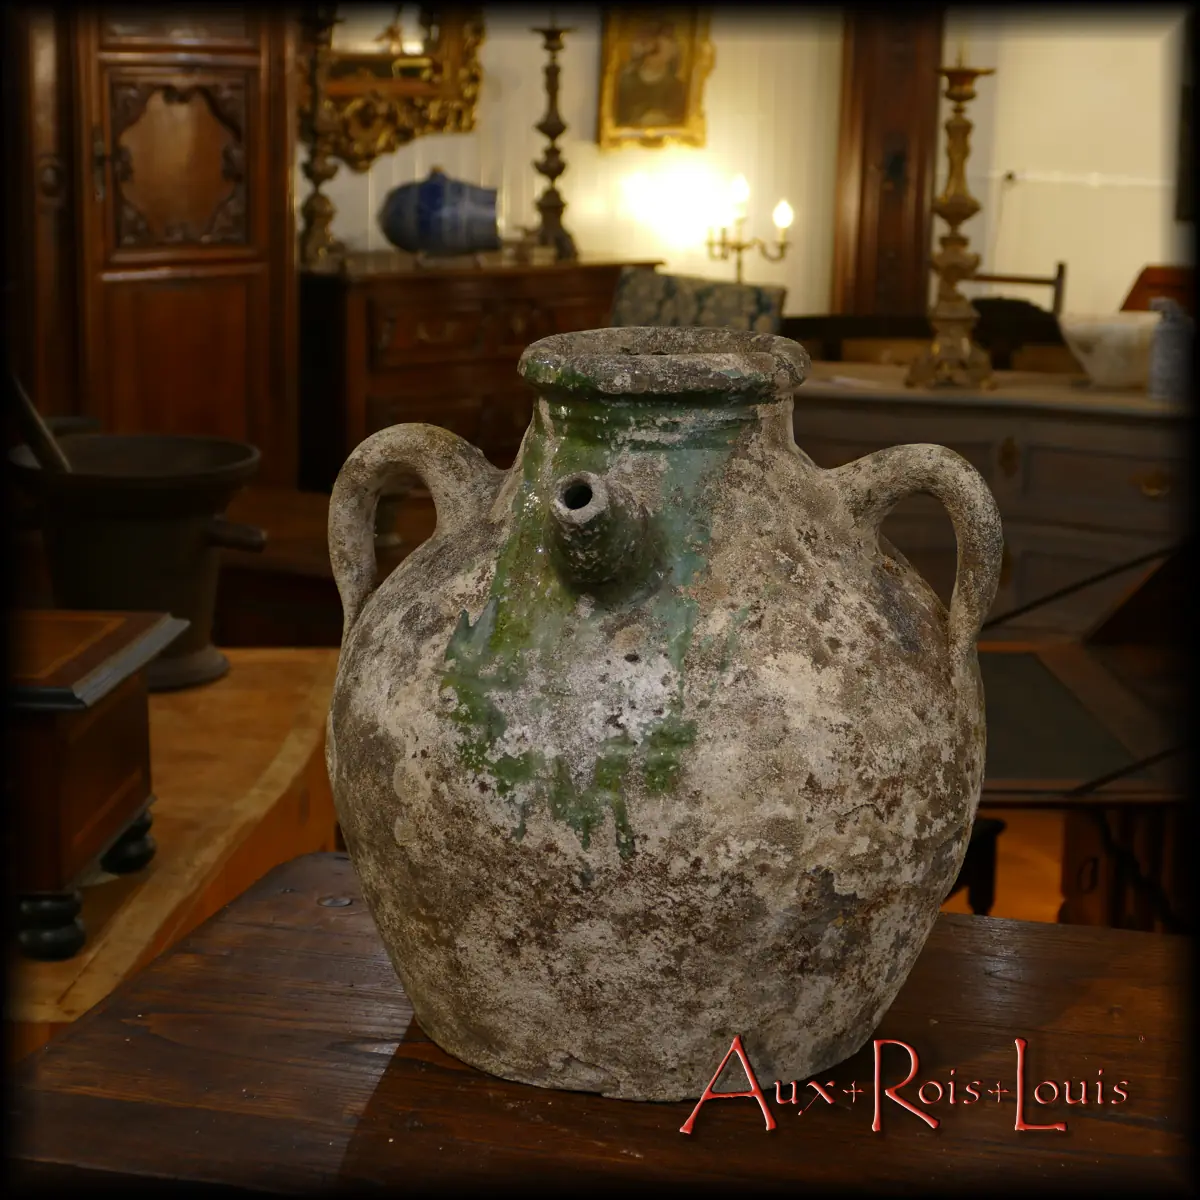 This oil jar, crafted in Saintonge during the 19th century, has acquired a patina over time, now displaying a stone-toned patina, mixed with a verdant moss at the historical location of its protective “bavette” against thick walnut oil spills, which was used for domestic and municipal lighting back then.